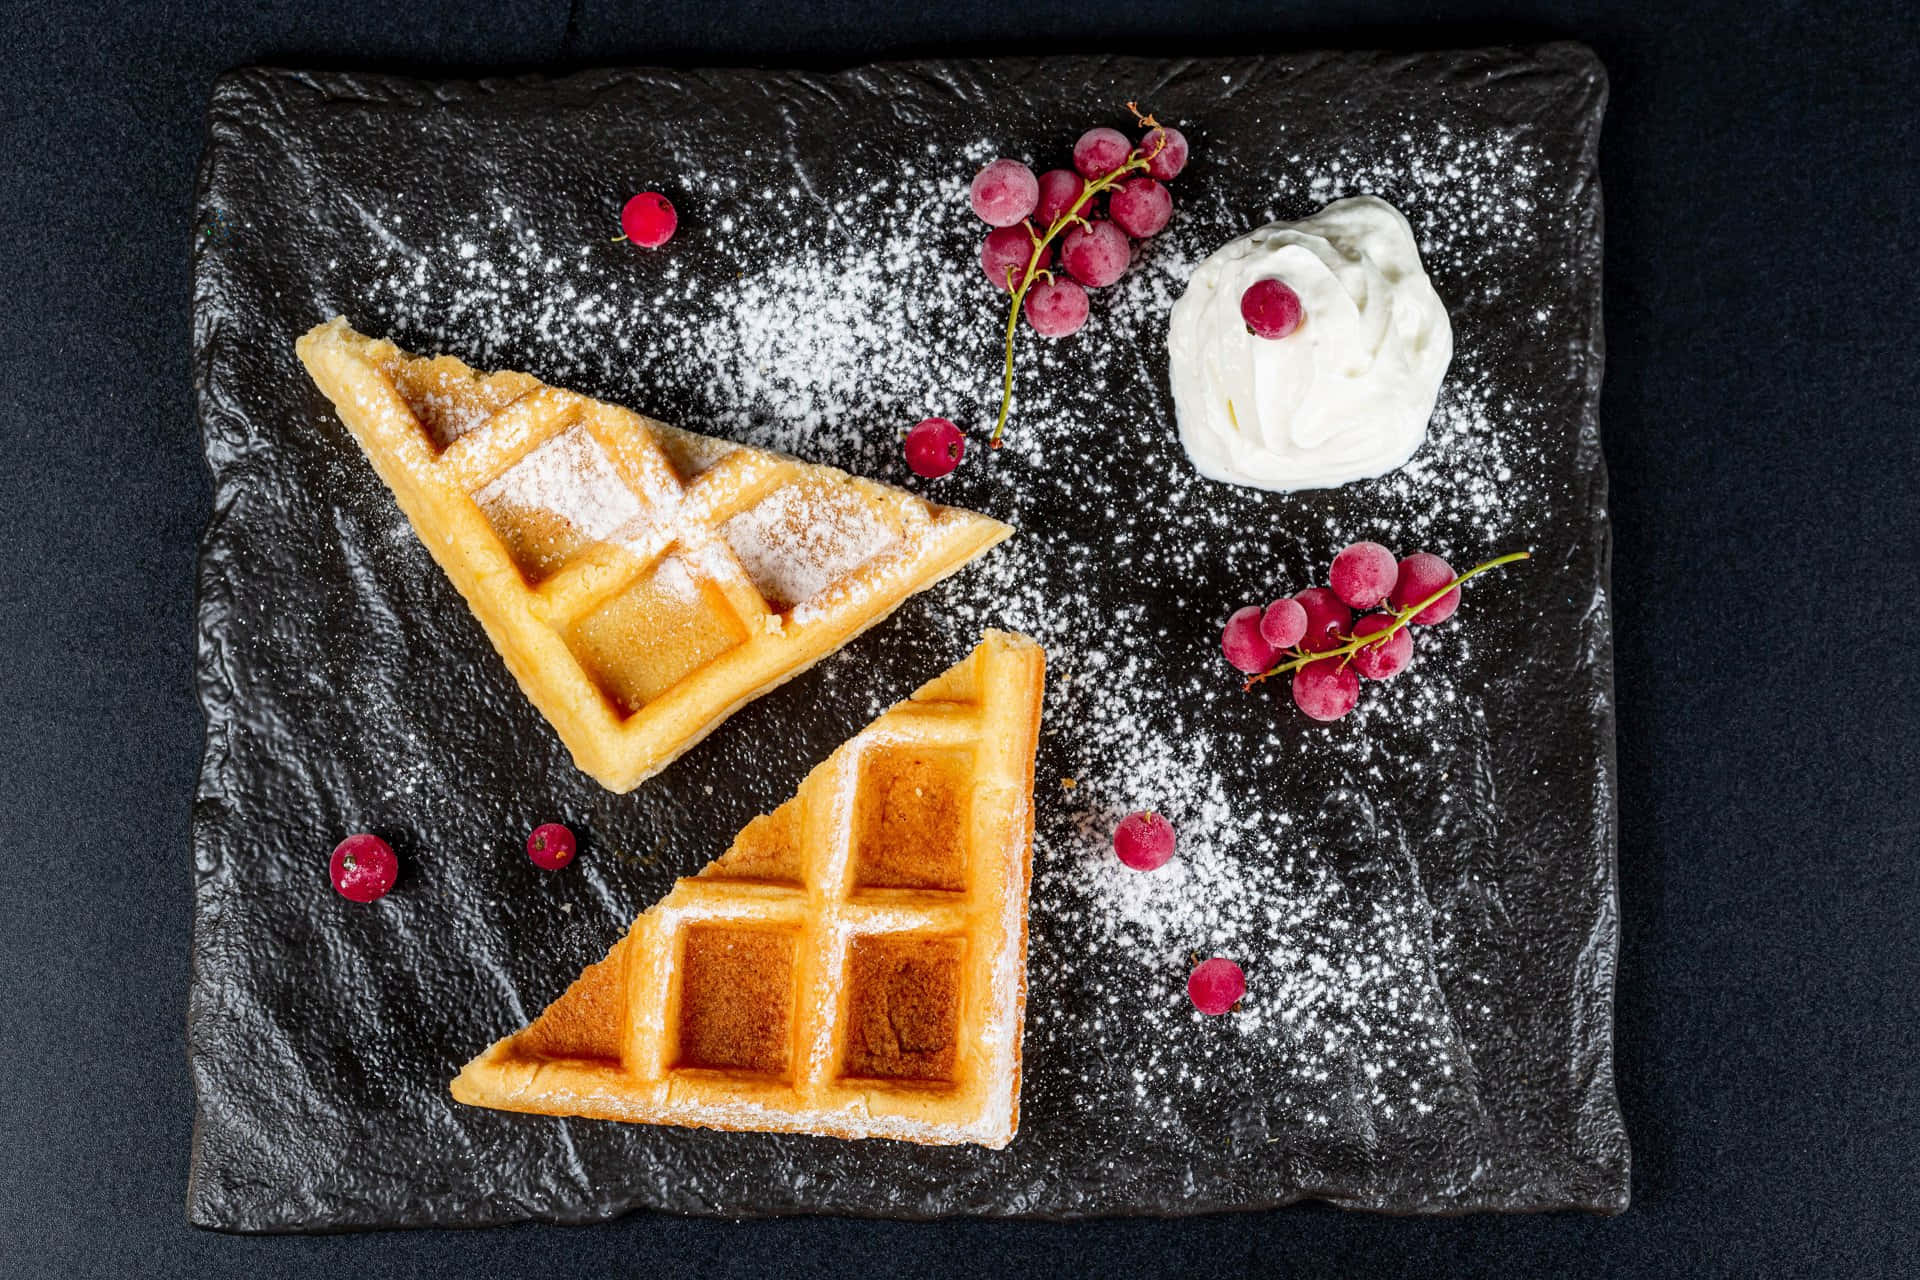 Delicious golden waffle on a plate